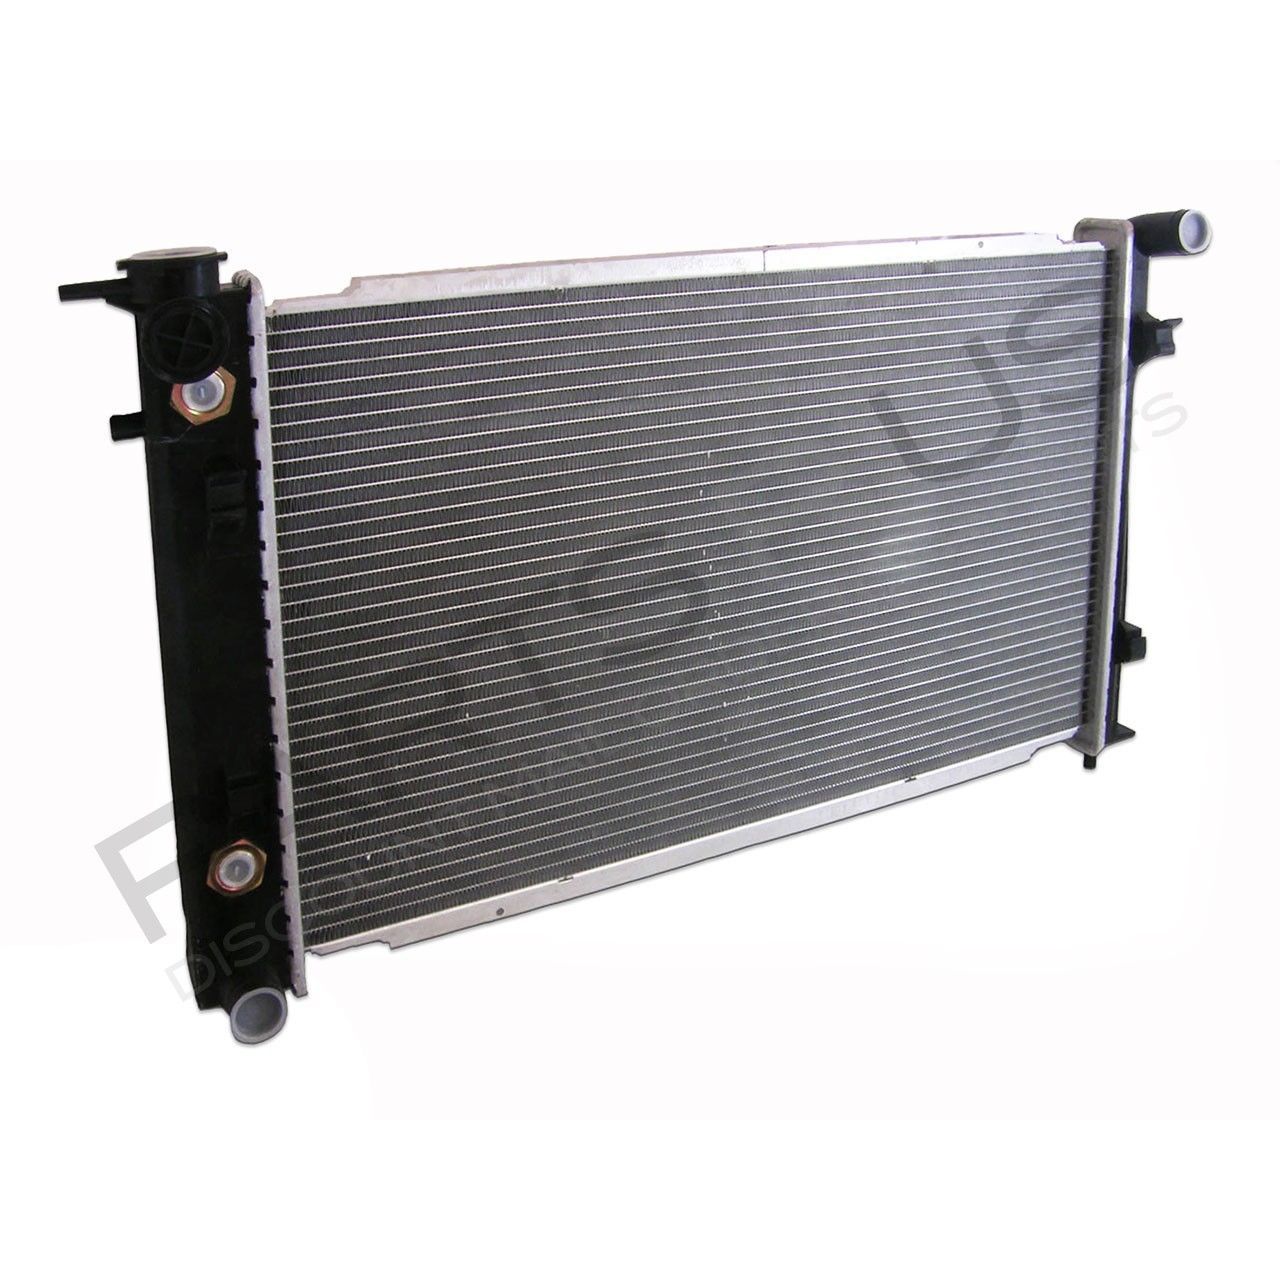 Radiator for Holden VY Commodore V6 3.8Ltr 02 03 04 Auto & Manual